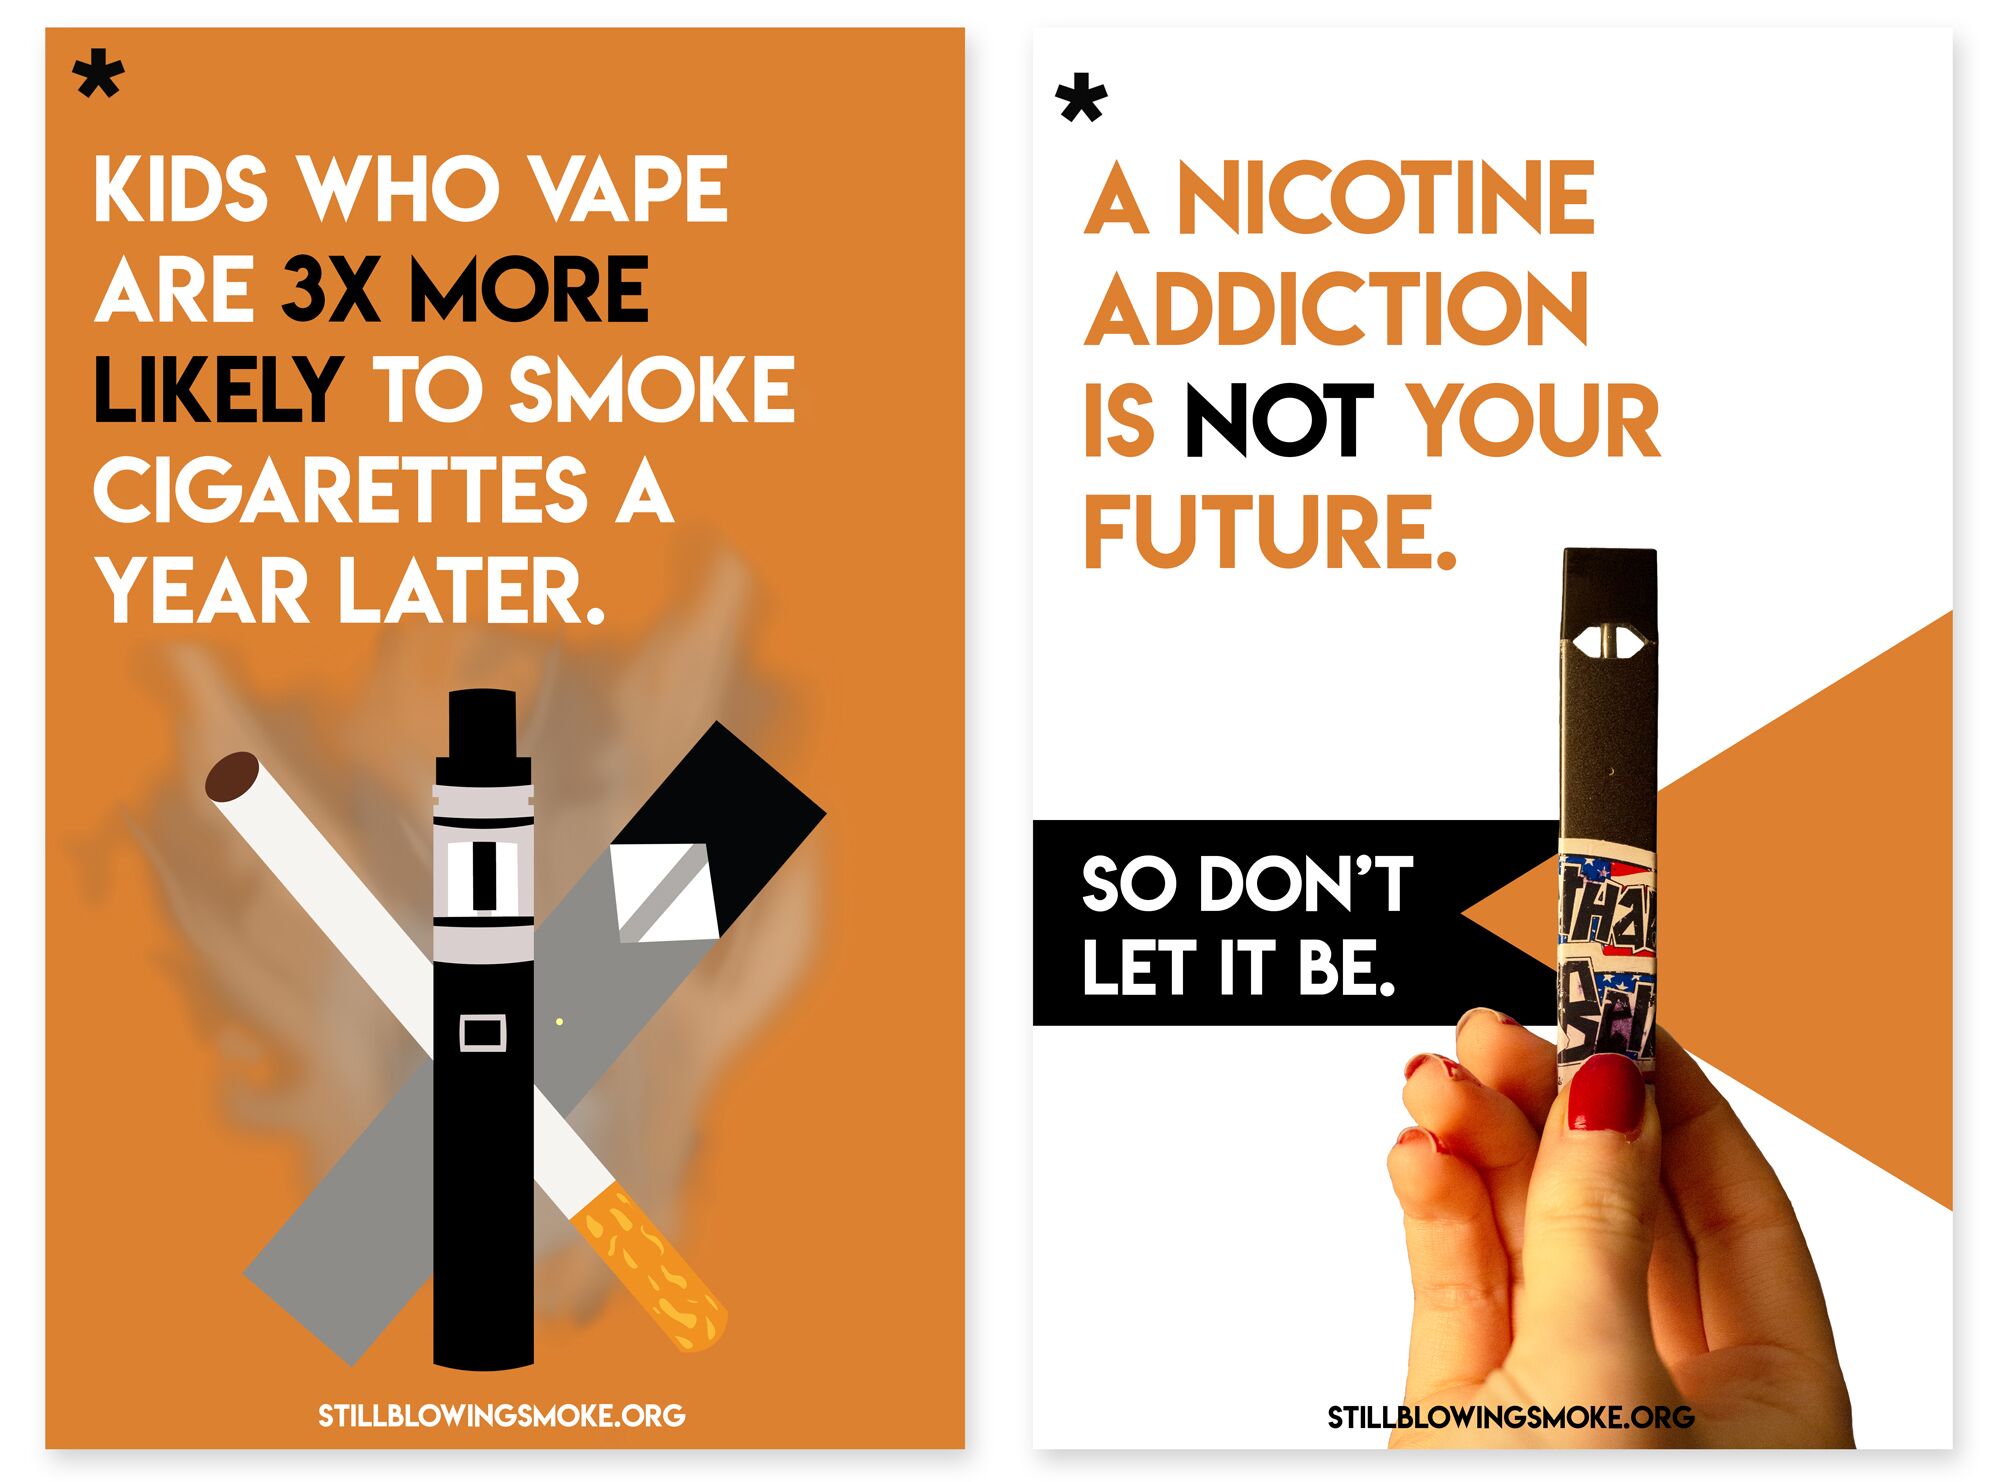 Two images of posters show graphics and text related to the topic of e-cigarettes. The first features the headline "Kids who vape are 3x more likely to smoke cigarettes a year later." The second headline reads "A nicotine addiction is not your future."